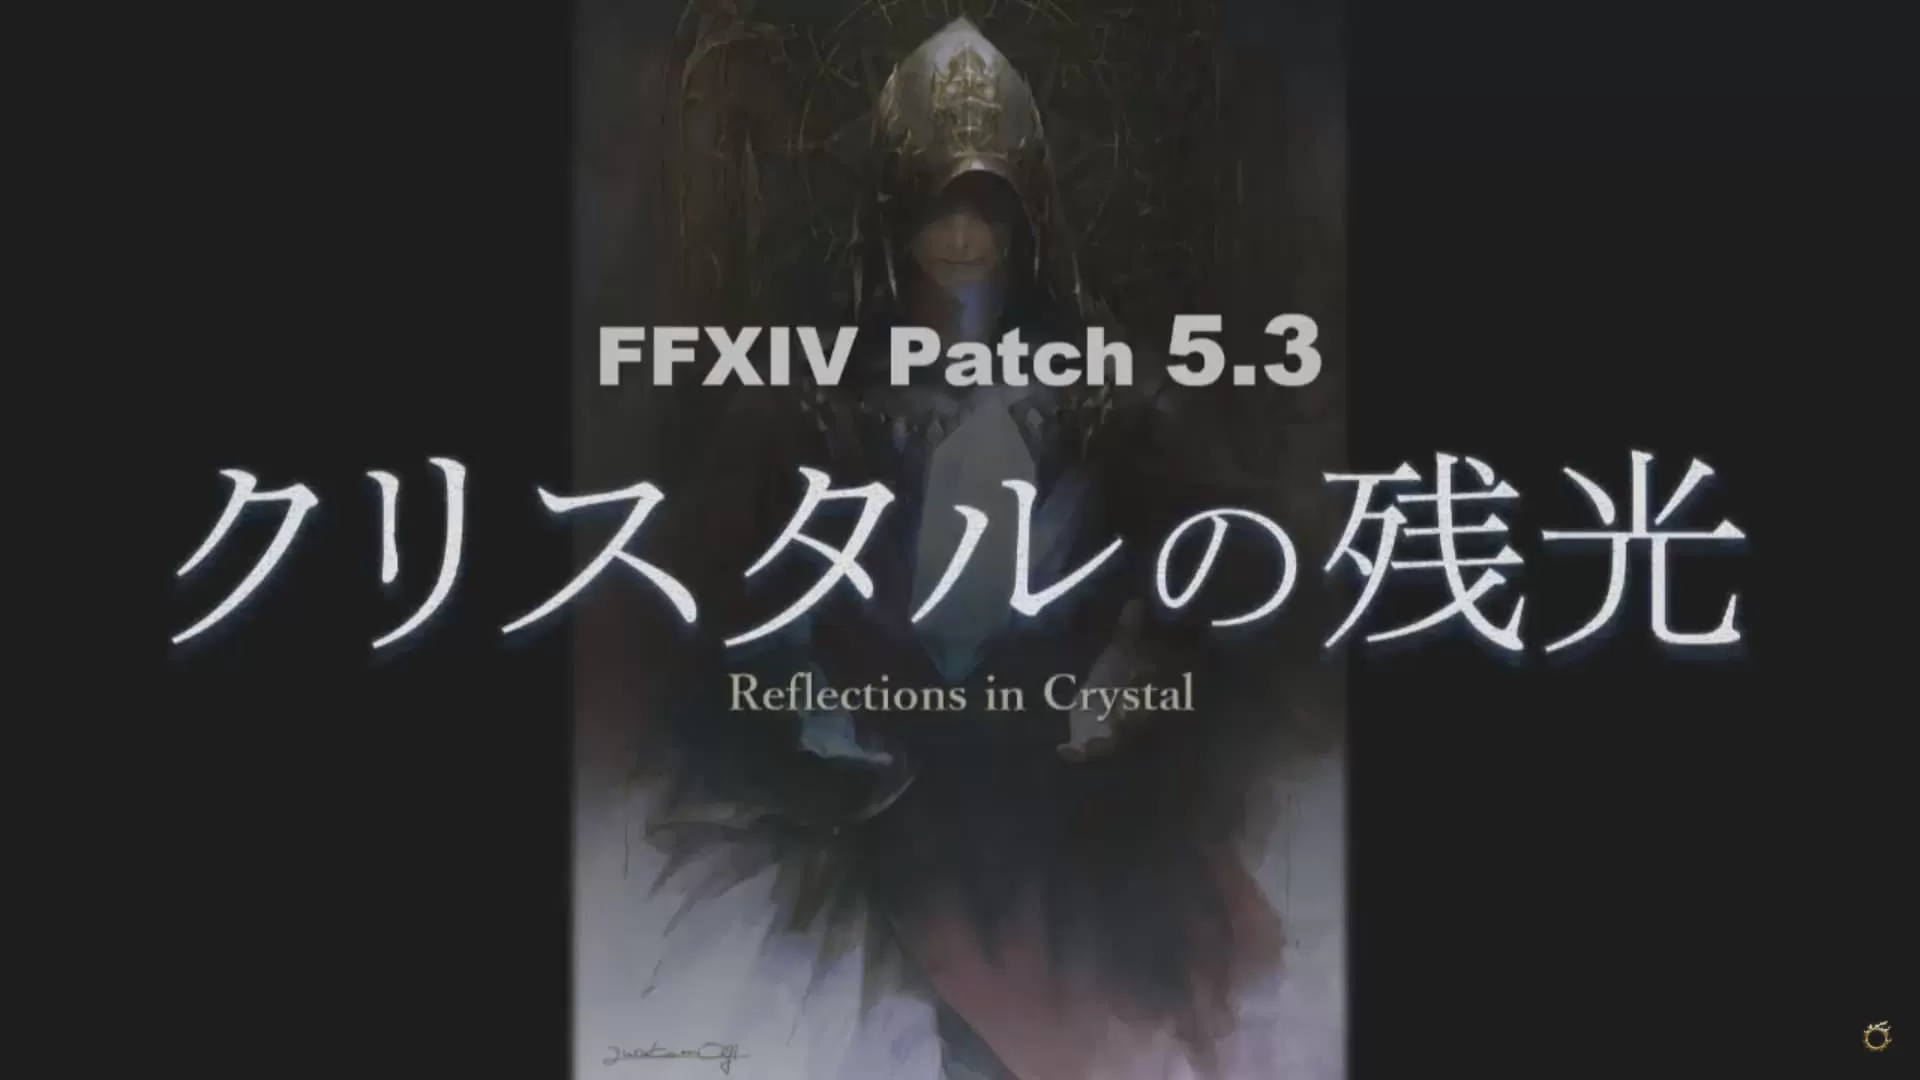 Final Fantasy XIV Patch 5.3 - Reflections in Crystal Banner